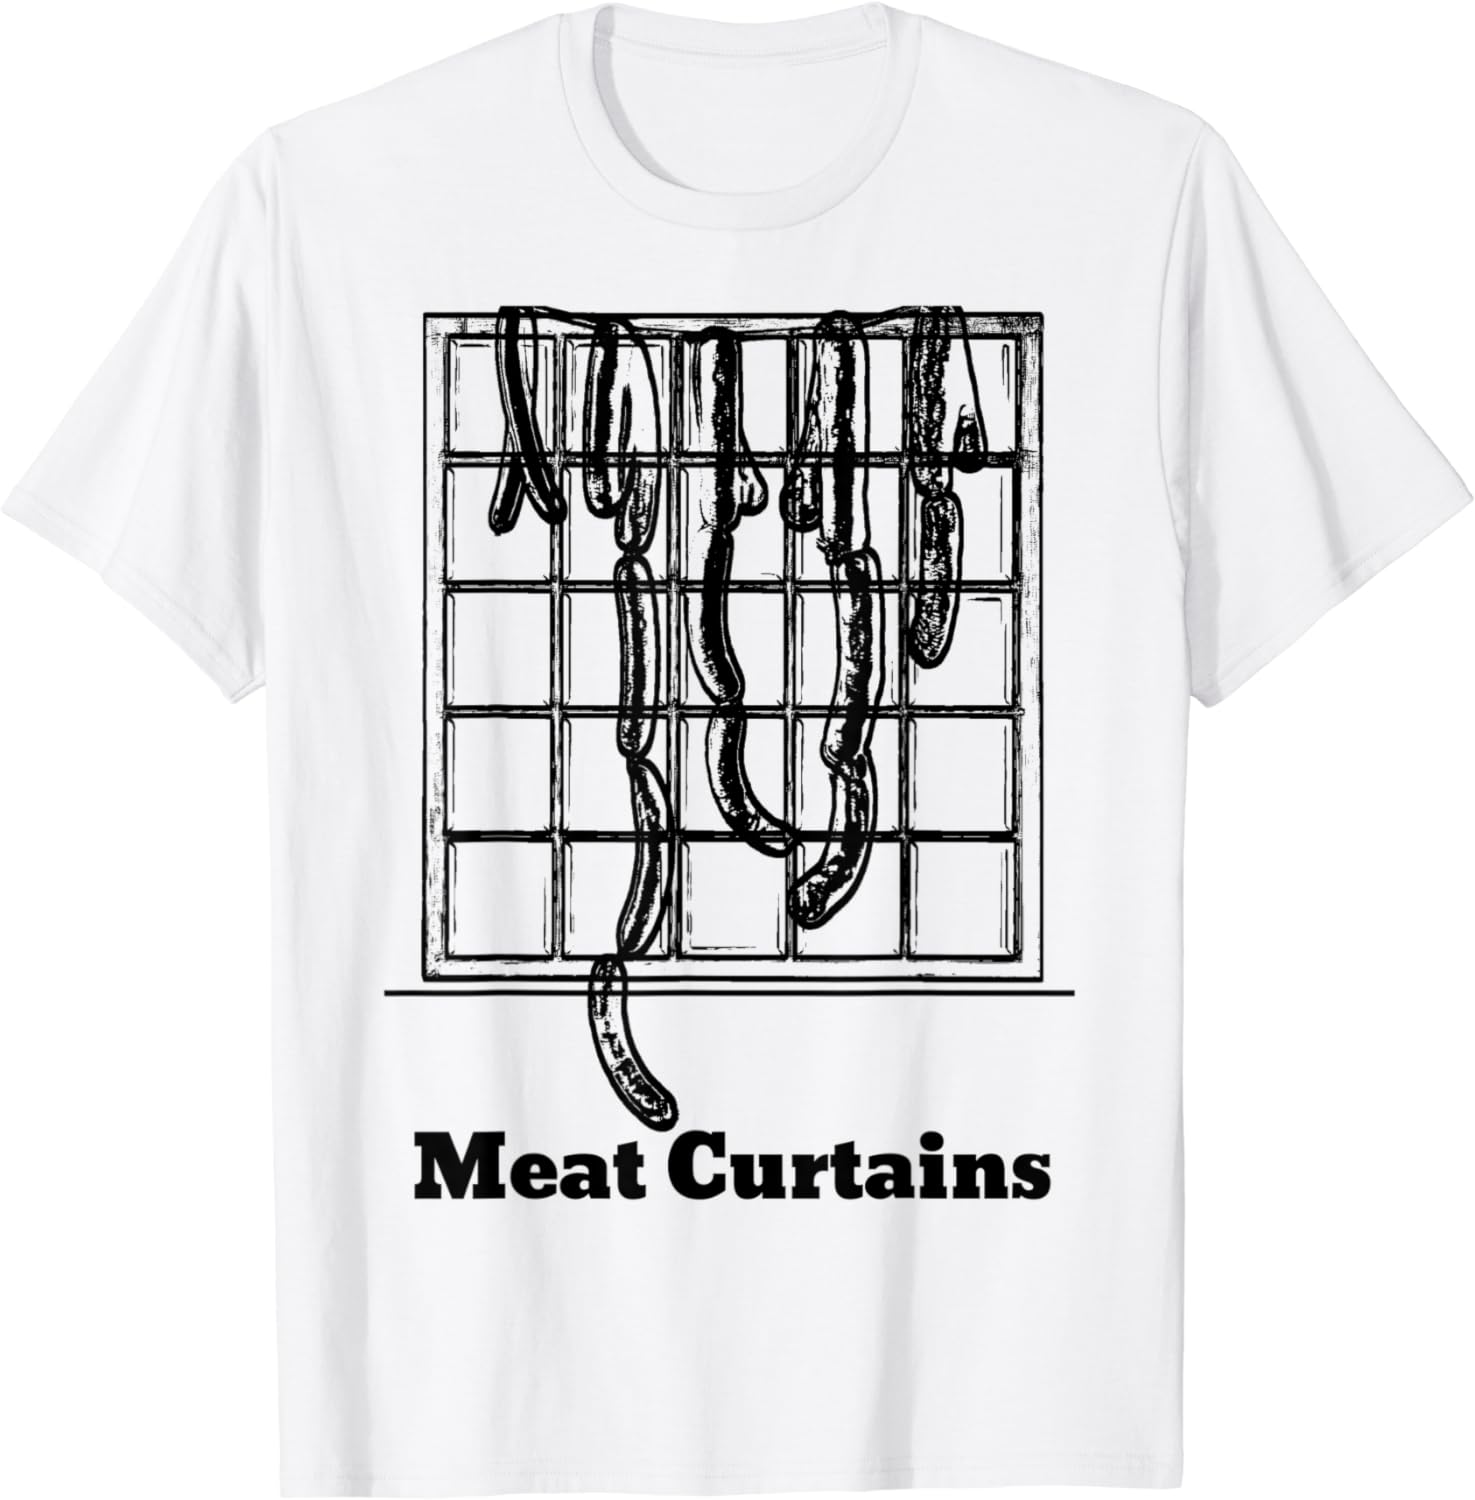 Best of What do meat curtains look like